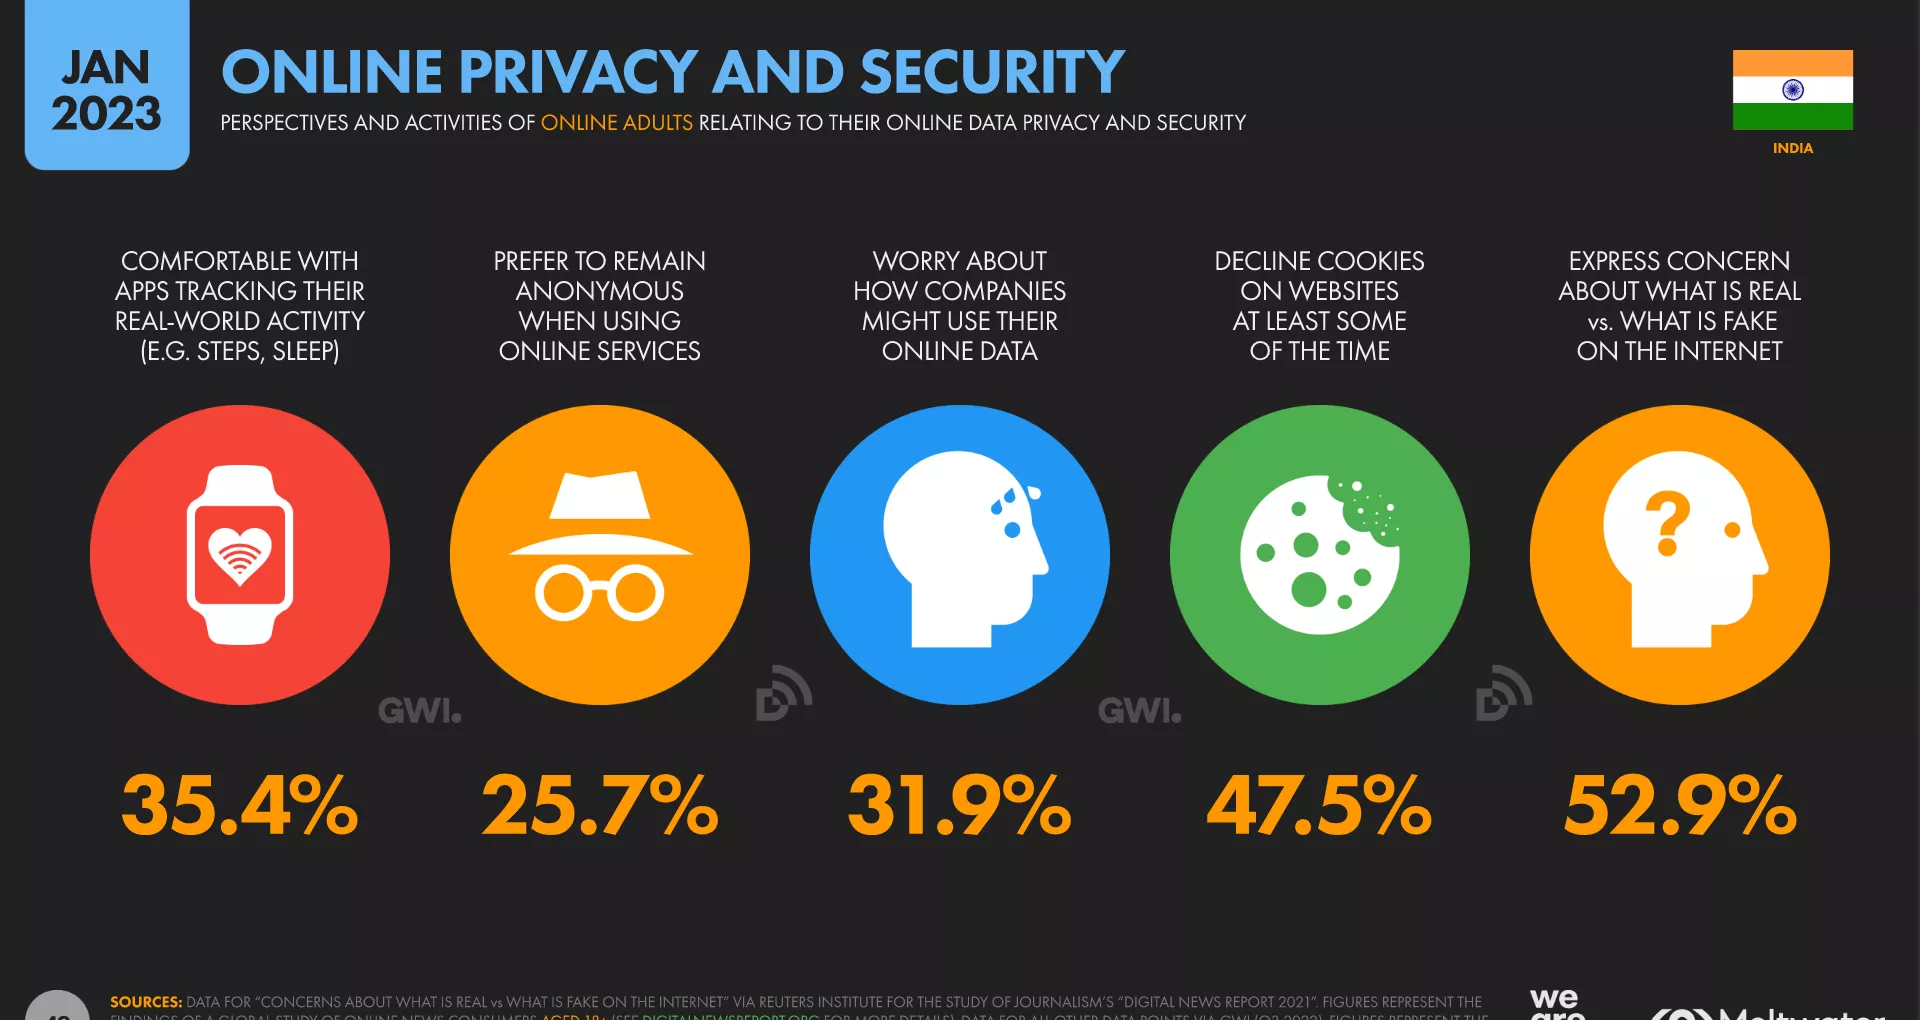 Online privacy and security in India 2023